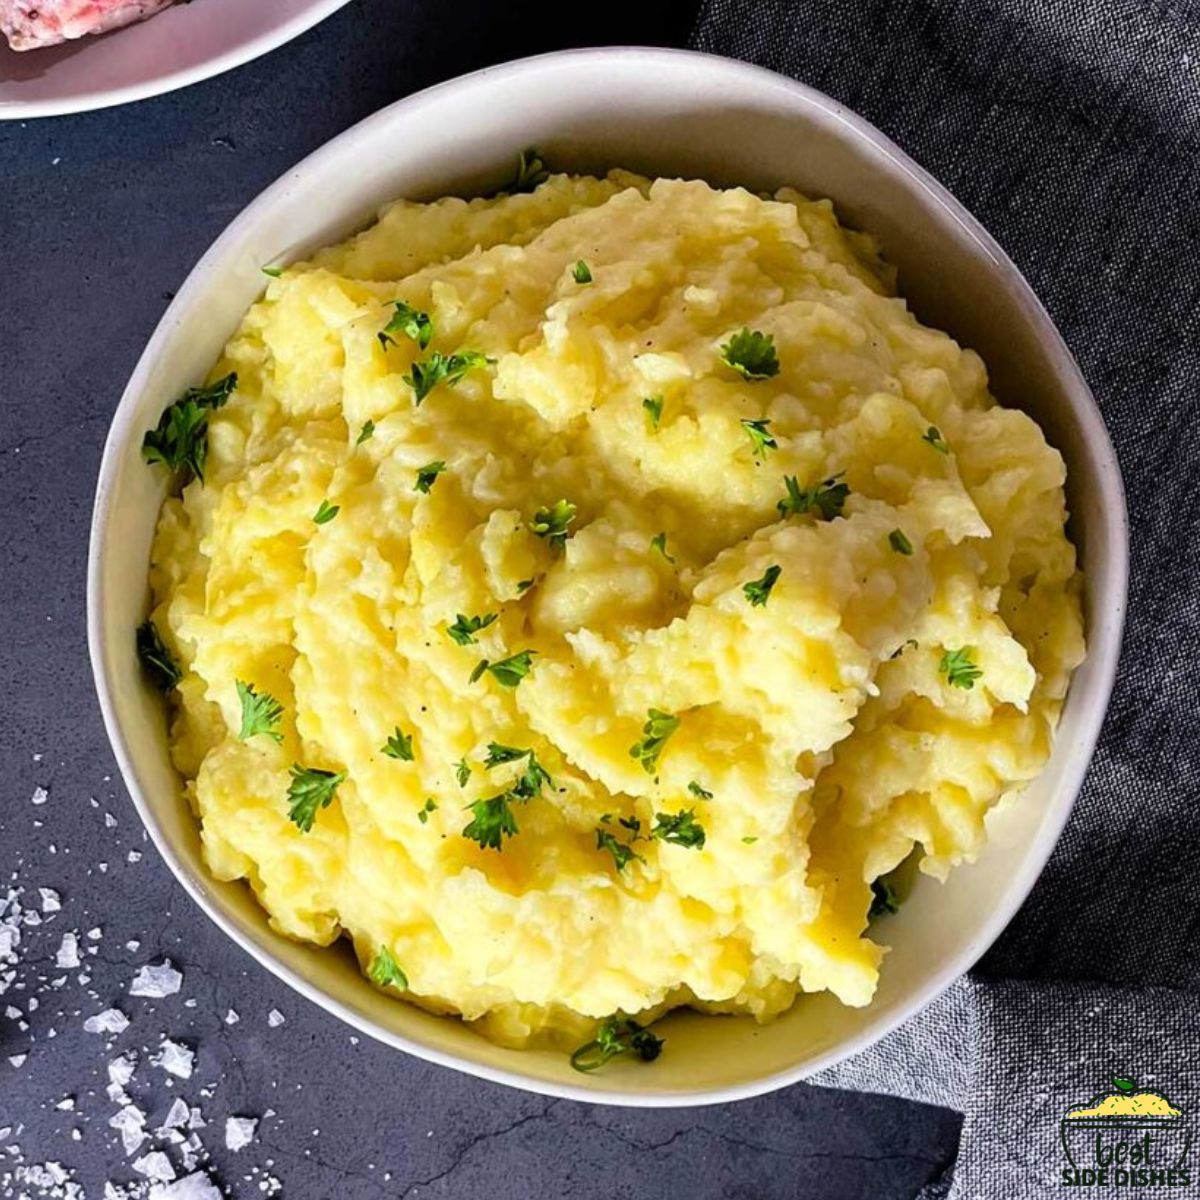 Creamy mashed potatoes piled high in a white bowl with chives on top